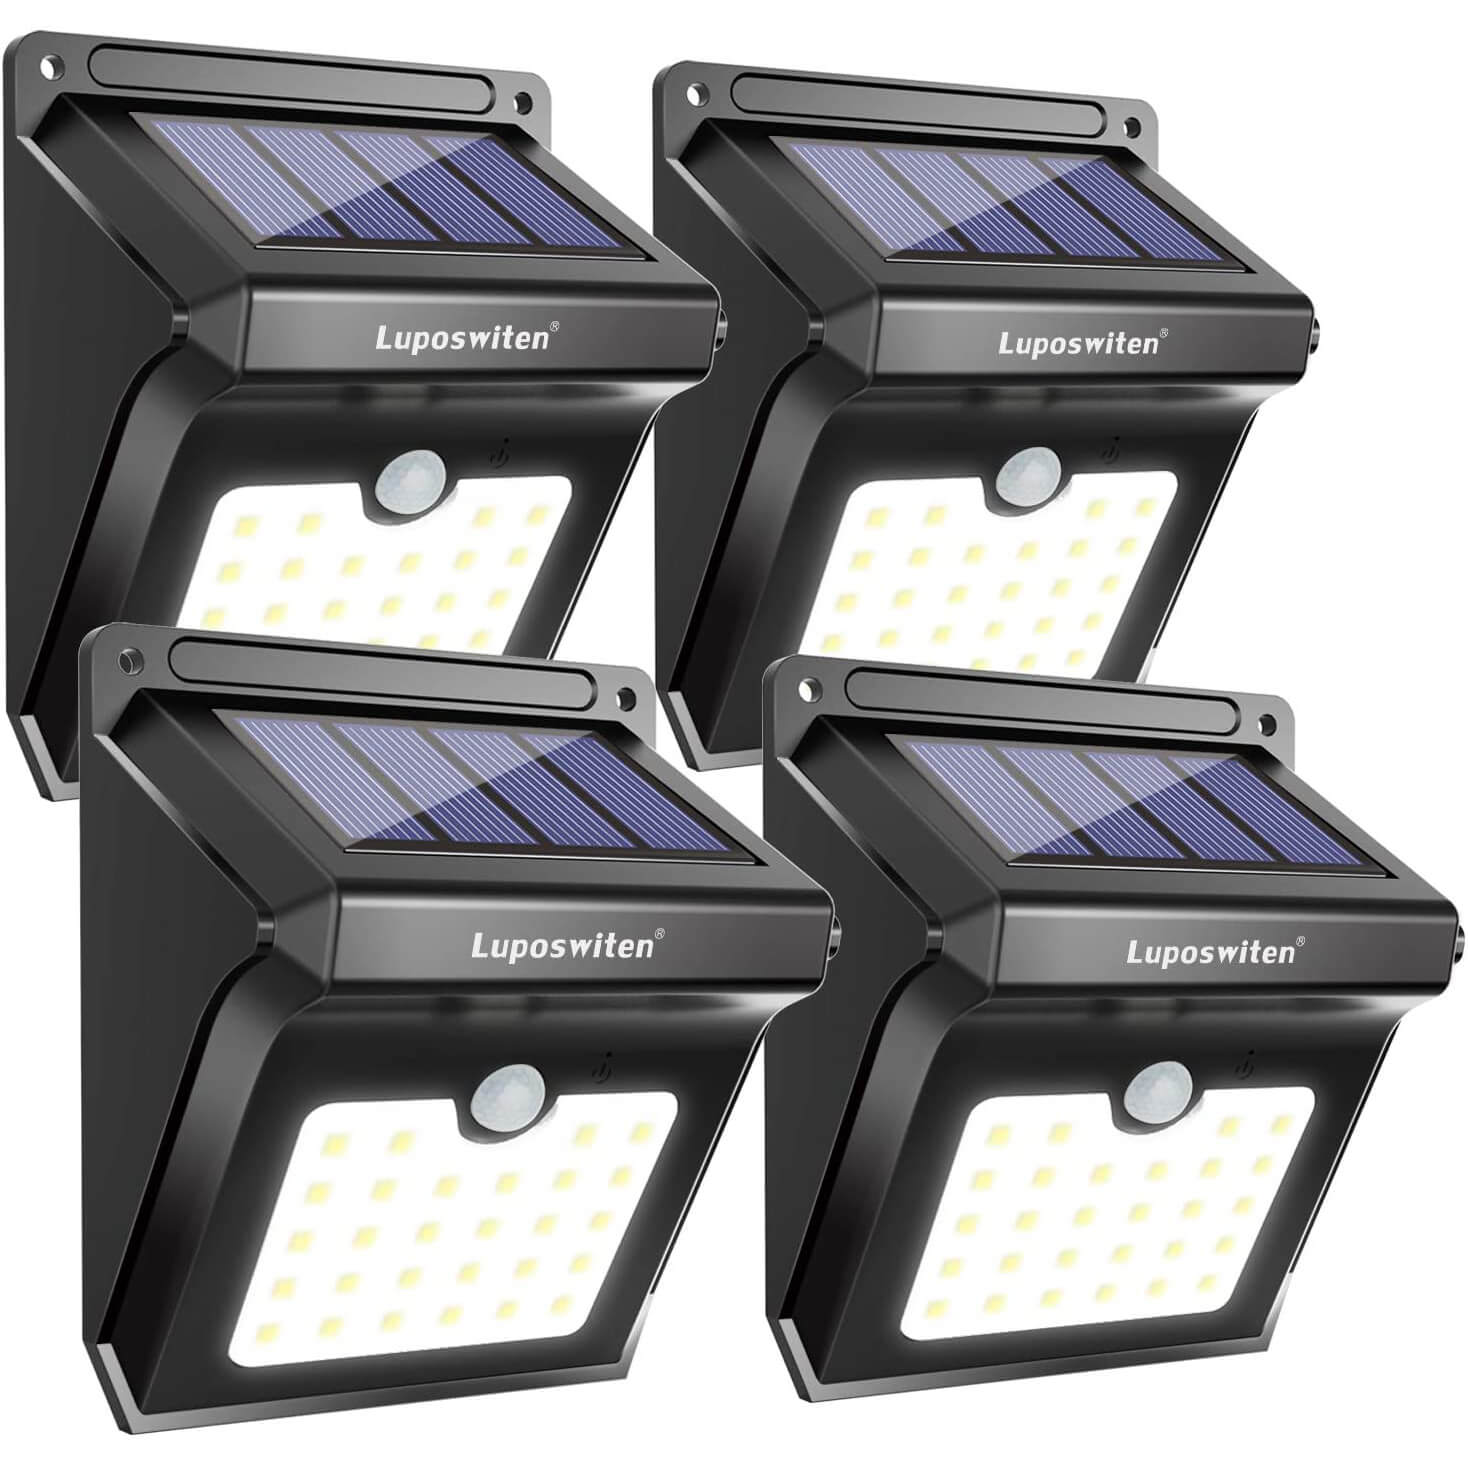 Luposwiten Solar Nautical Security Lights